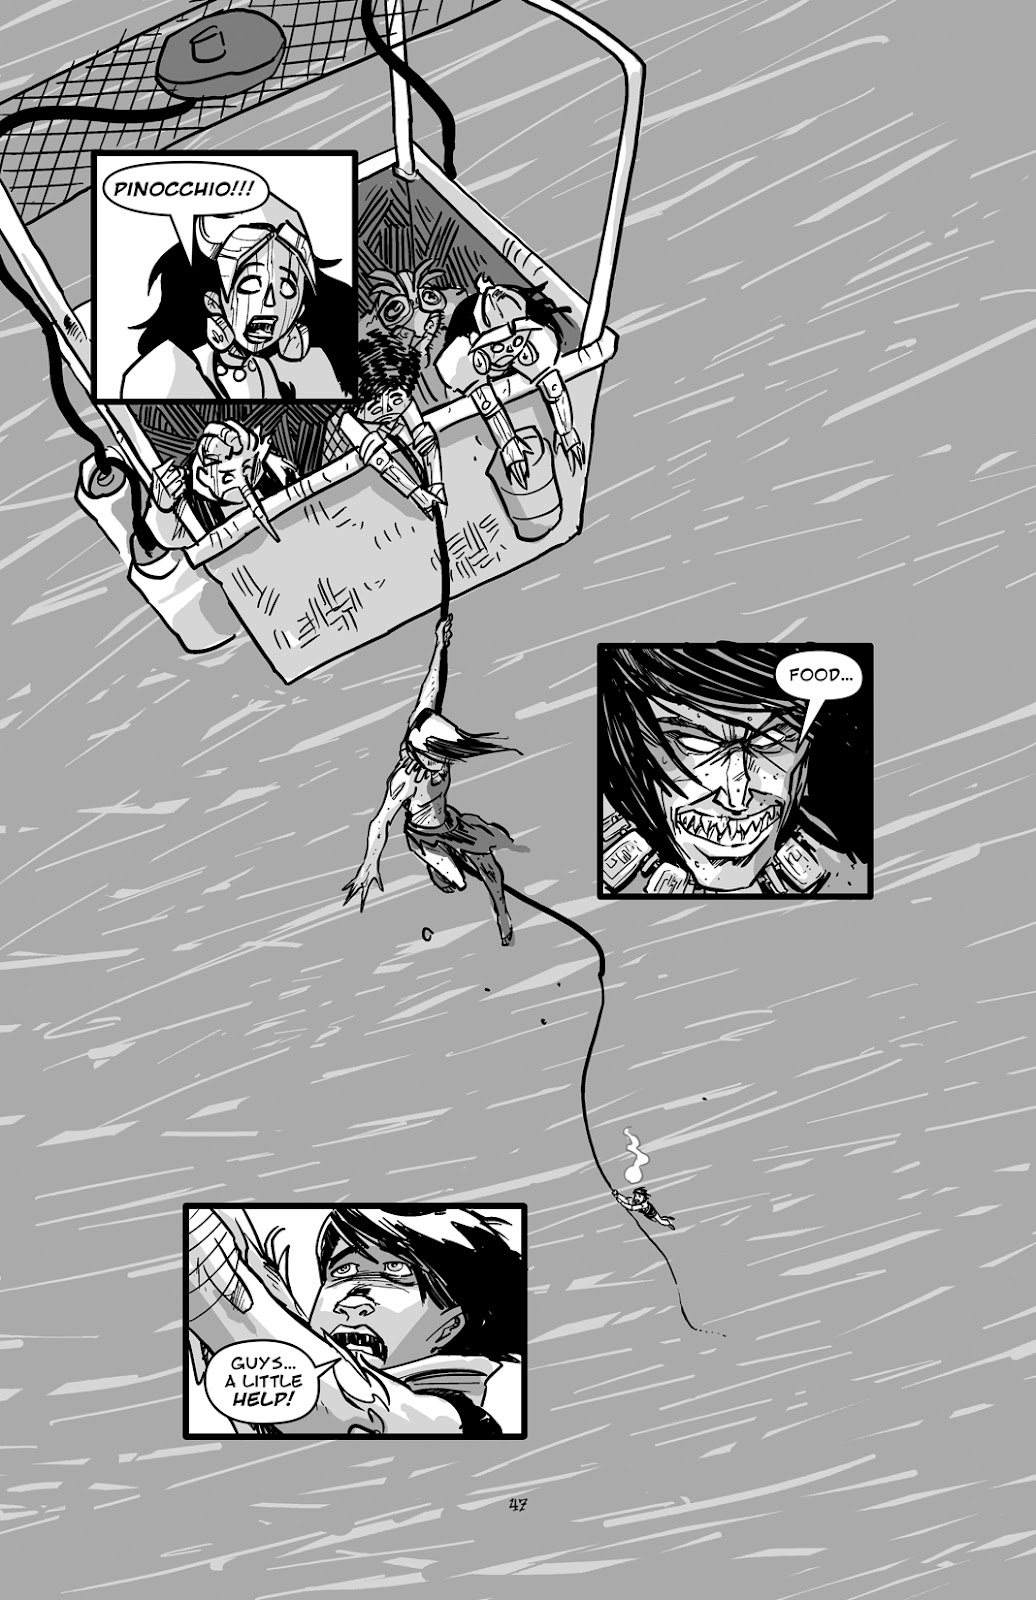 Pinocchio: Vampire Slayer - Of Wood and Blood issue 2 - Page 21